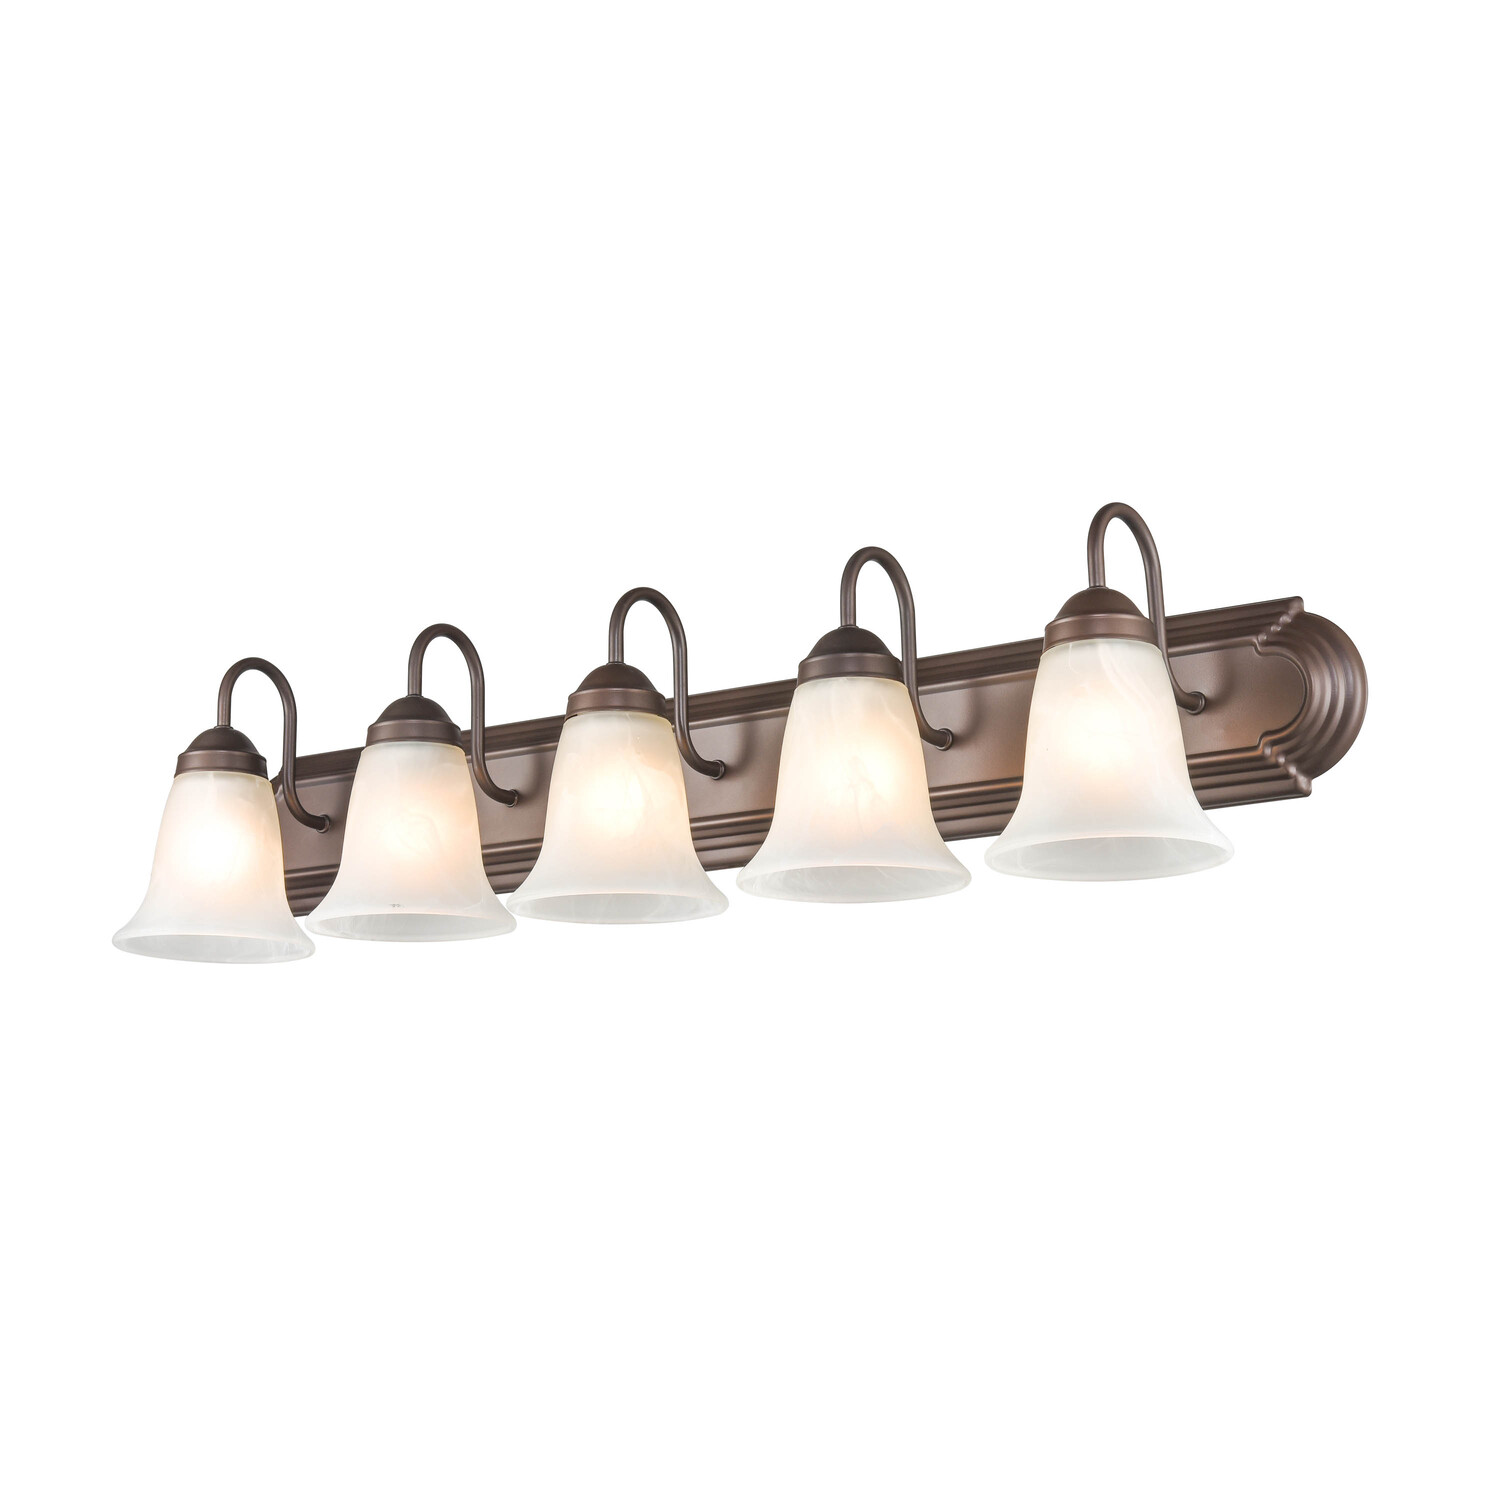 4285-BZ-Millennium Lighting-5 Light Bath Vanity-8.5 Inches Tall and 36 Inches Wide-Bronze Finish - image 1 of 6